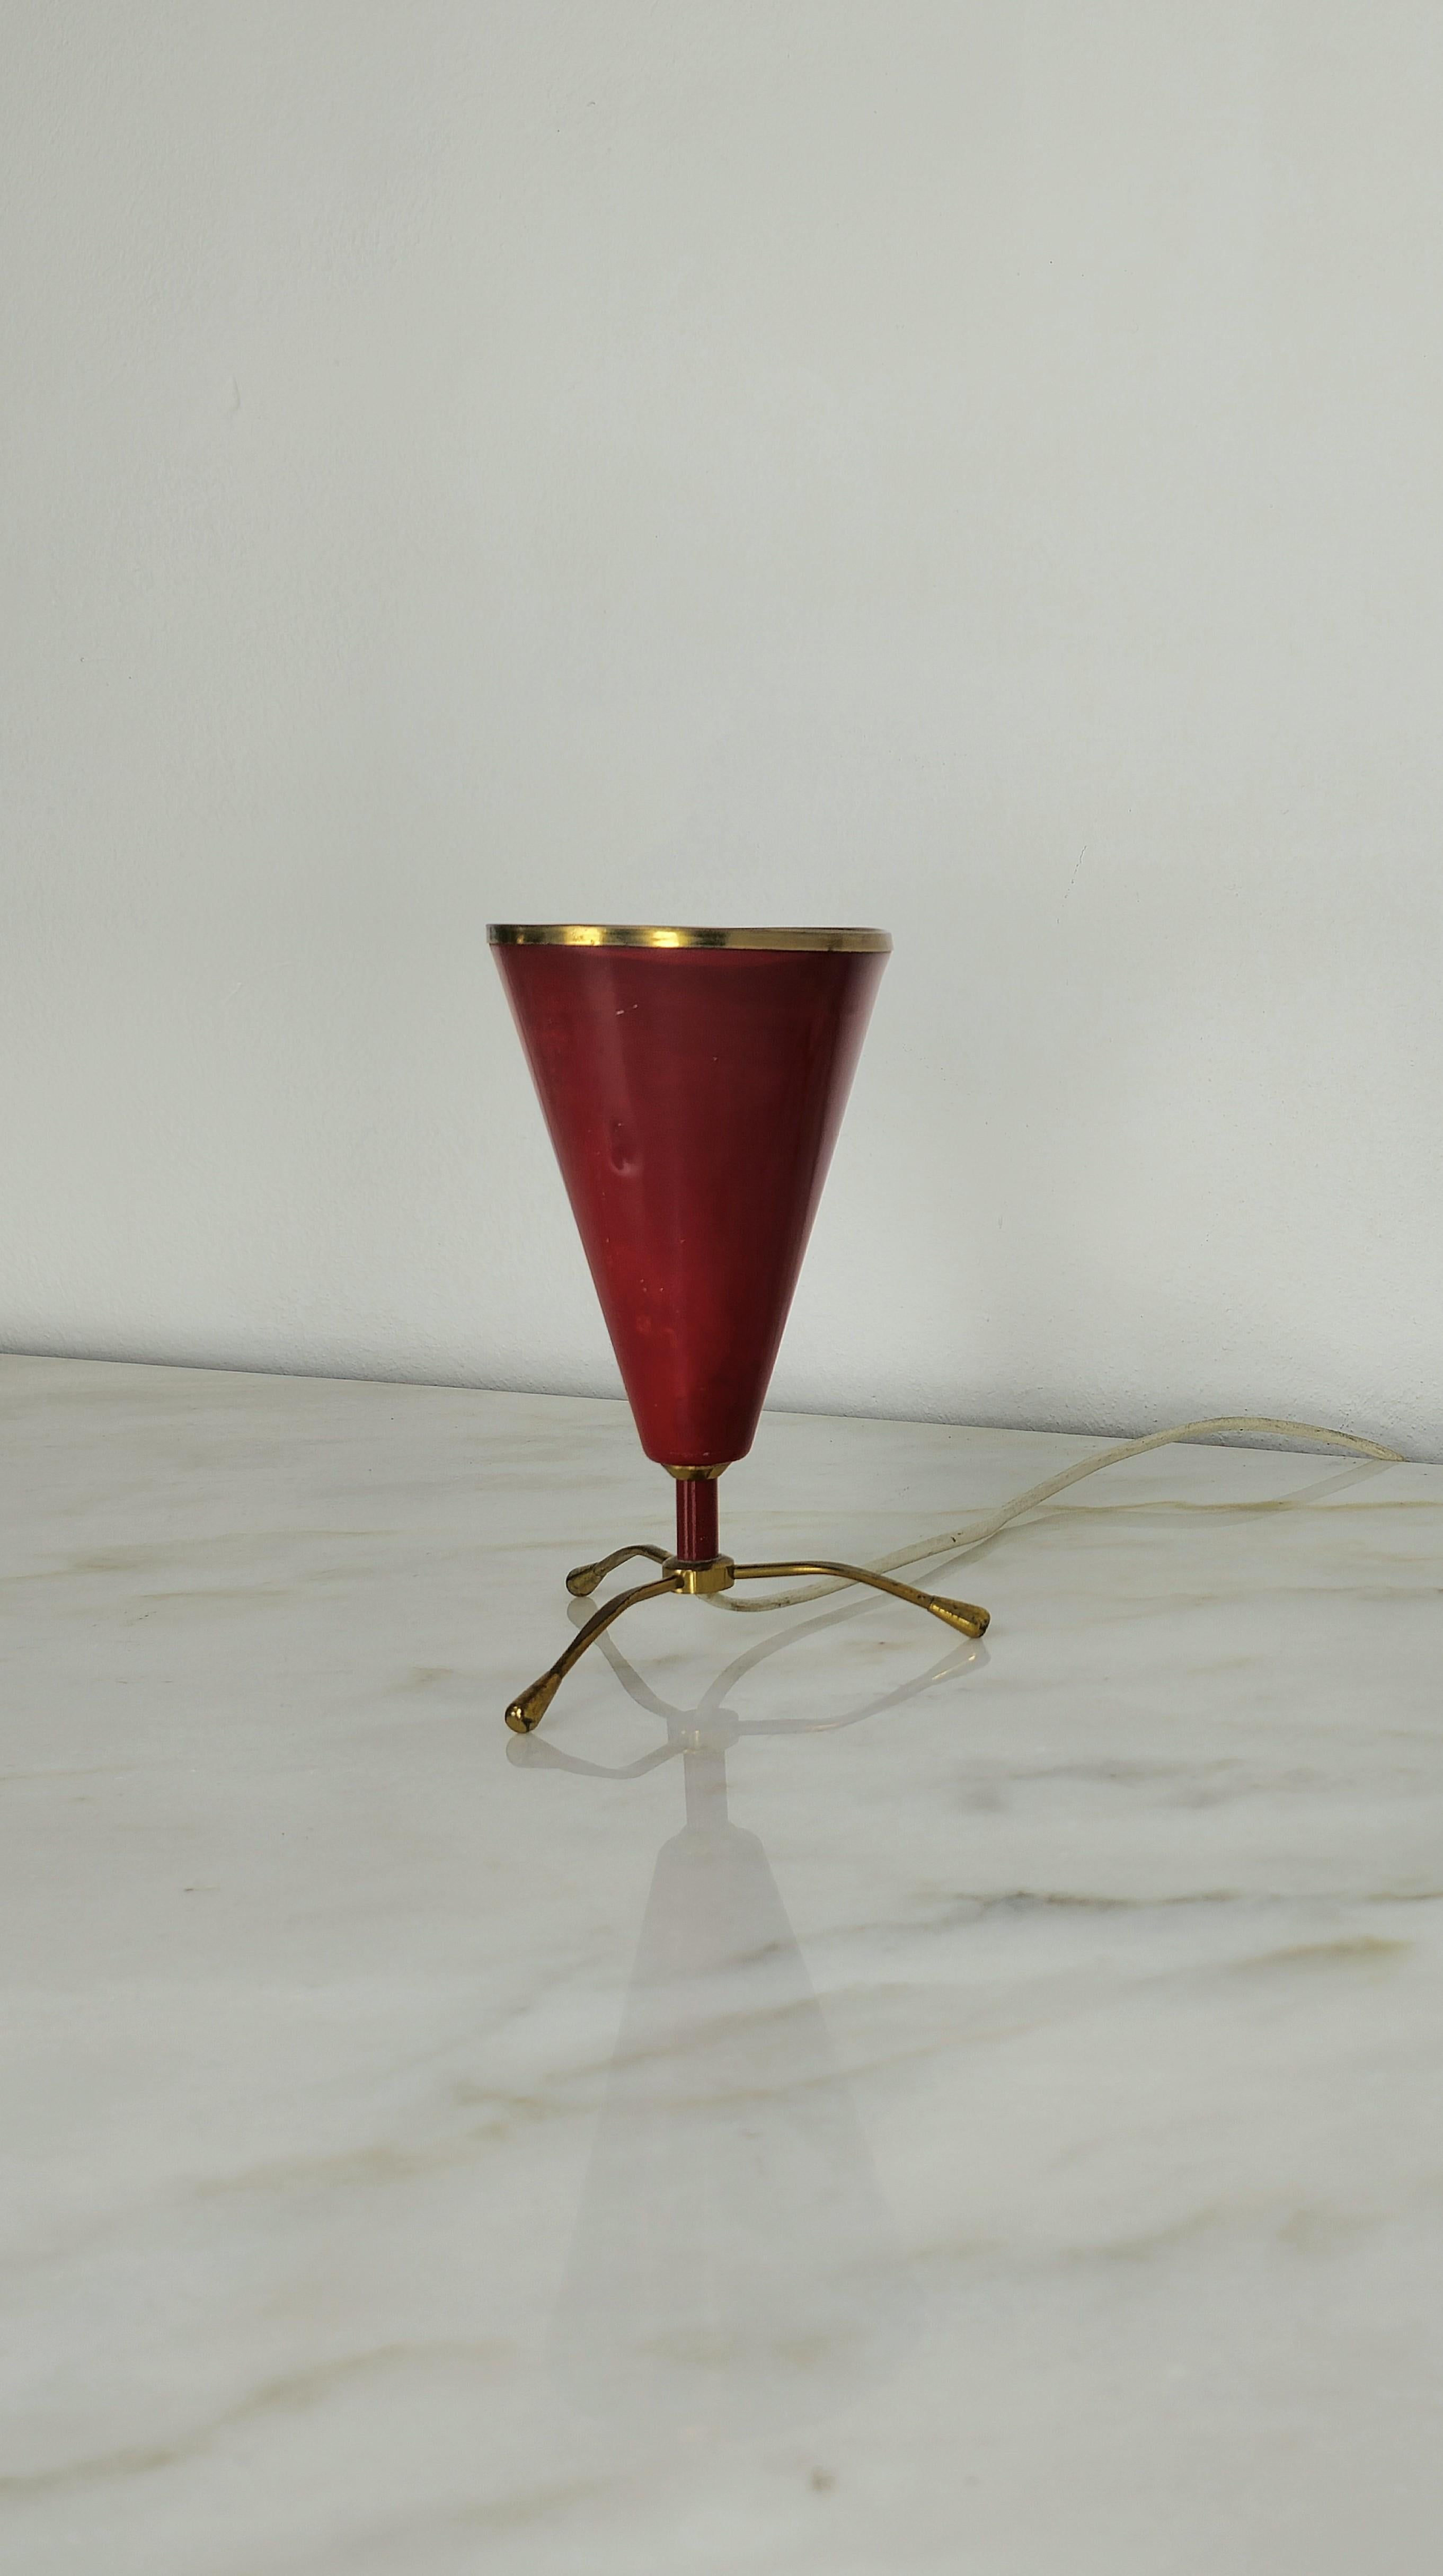 Mid-20th Century Table Lamp Brass Aluminum Red Attributable to Arredoluce Midcentury Italy 50s For Sale